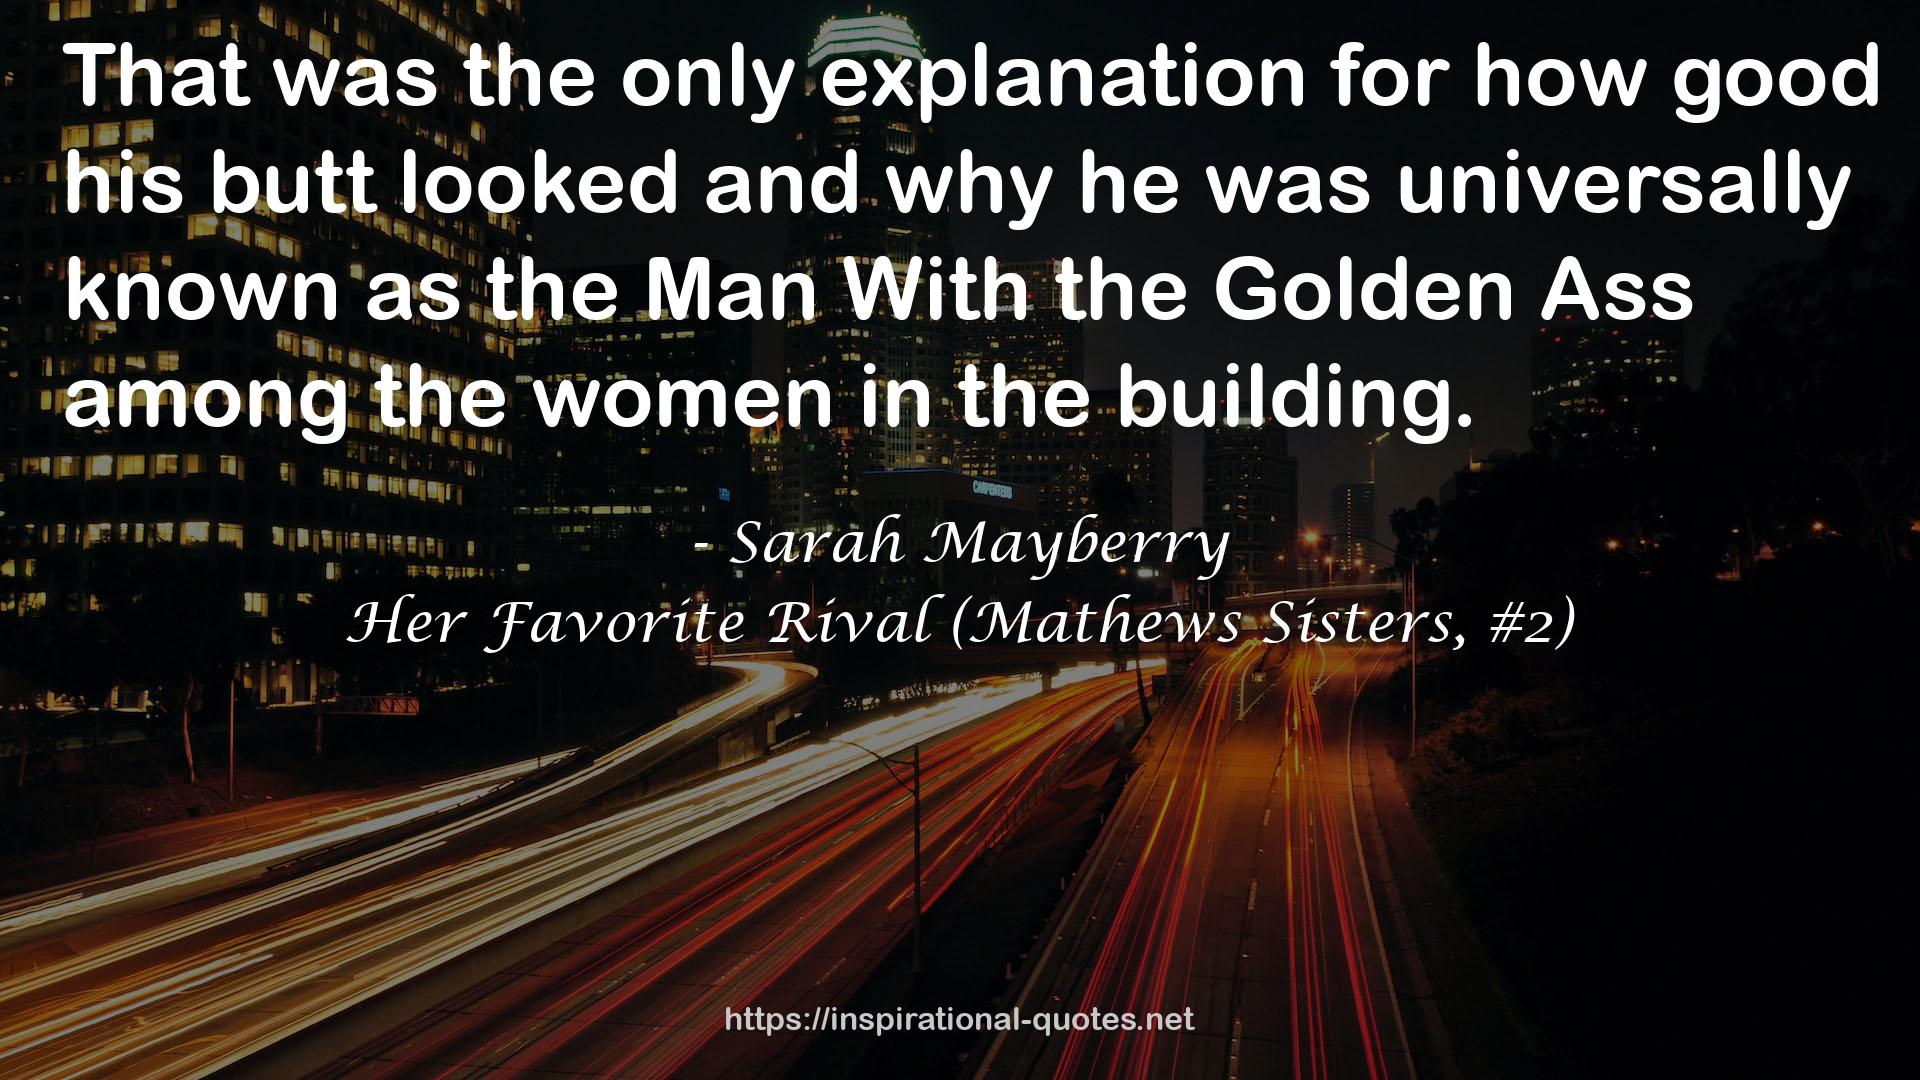 Her Favorite Rival (Mathews Sisters, #2) QUOTES